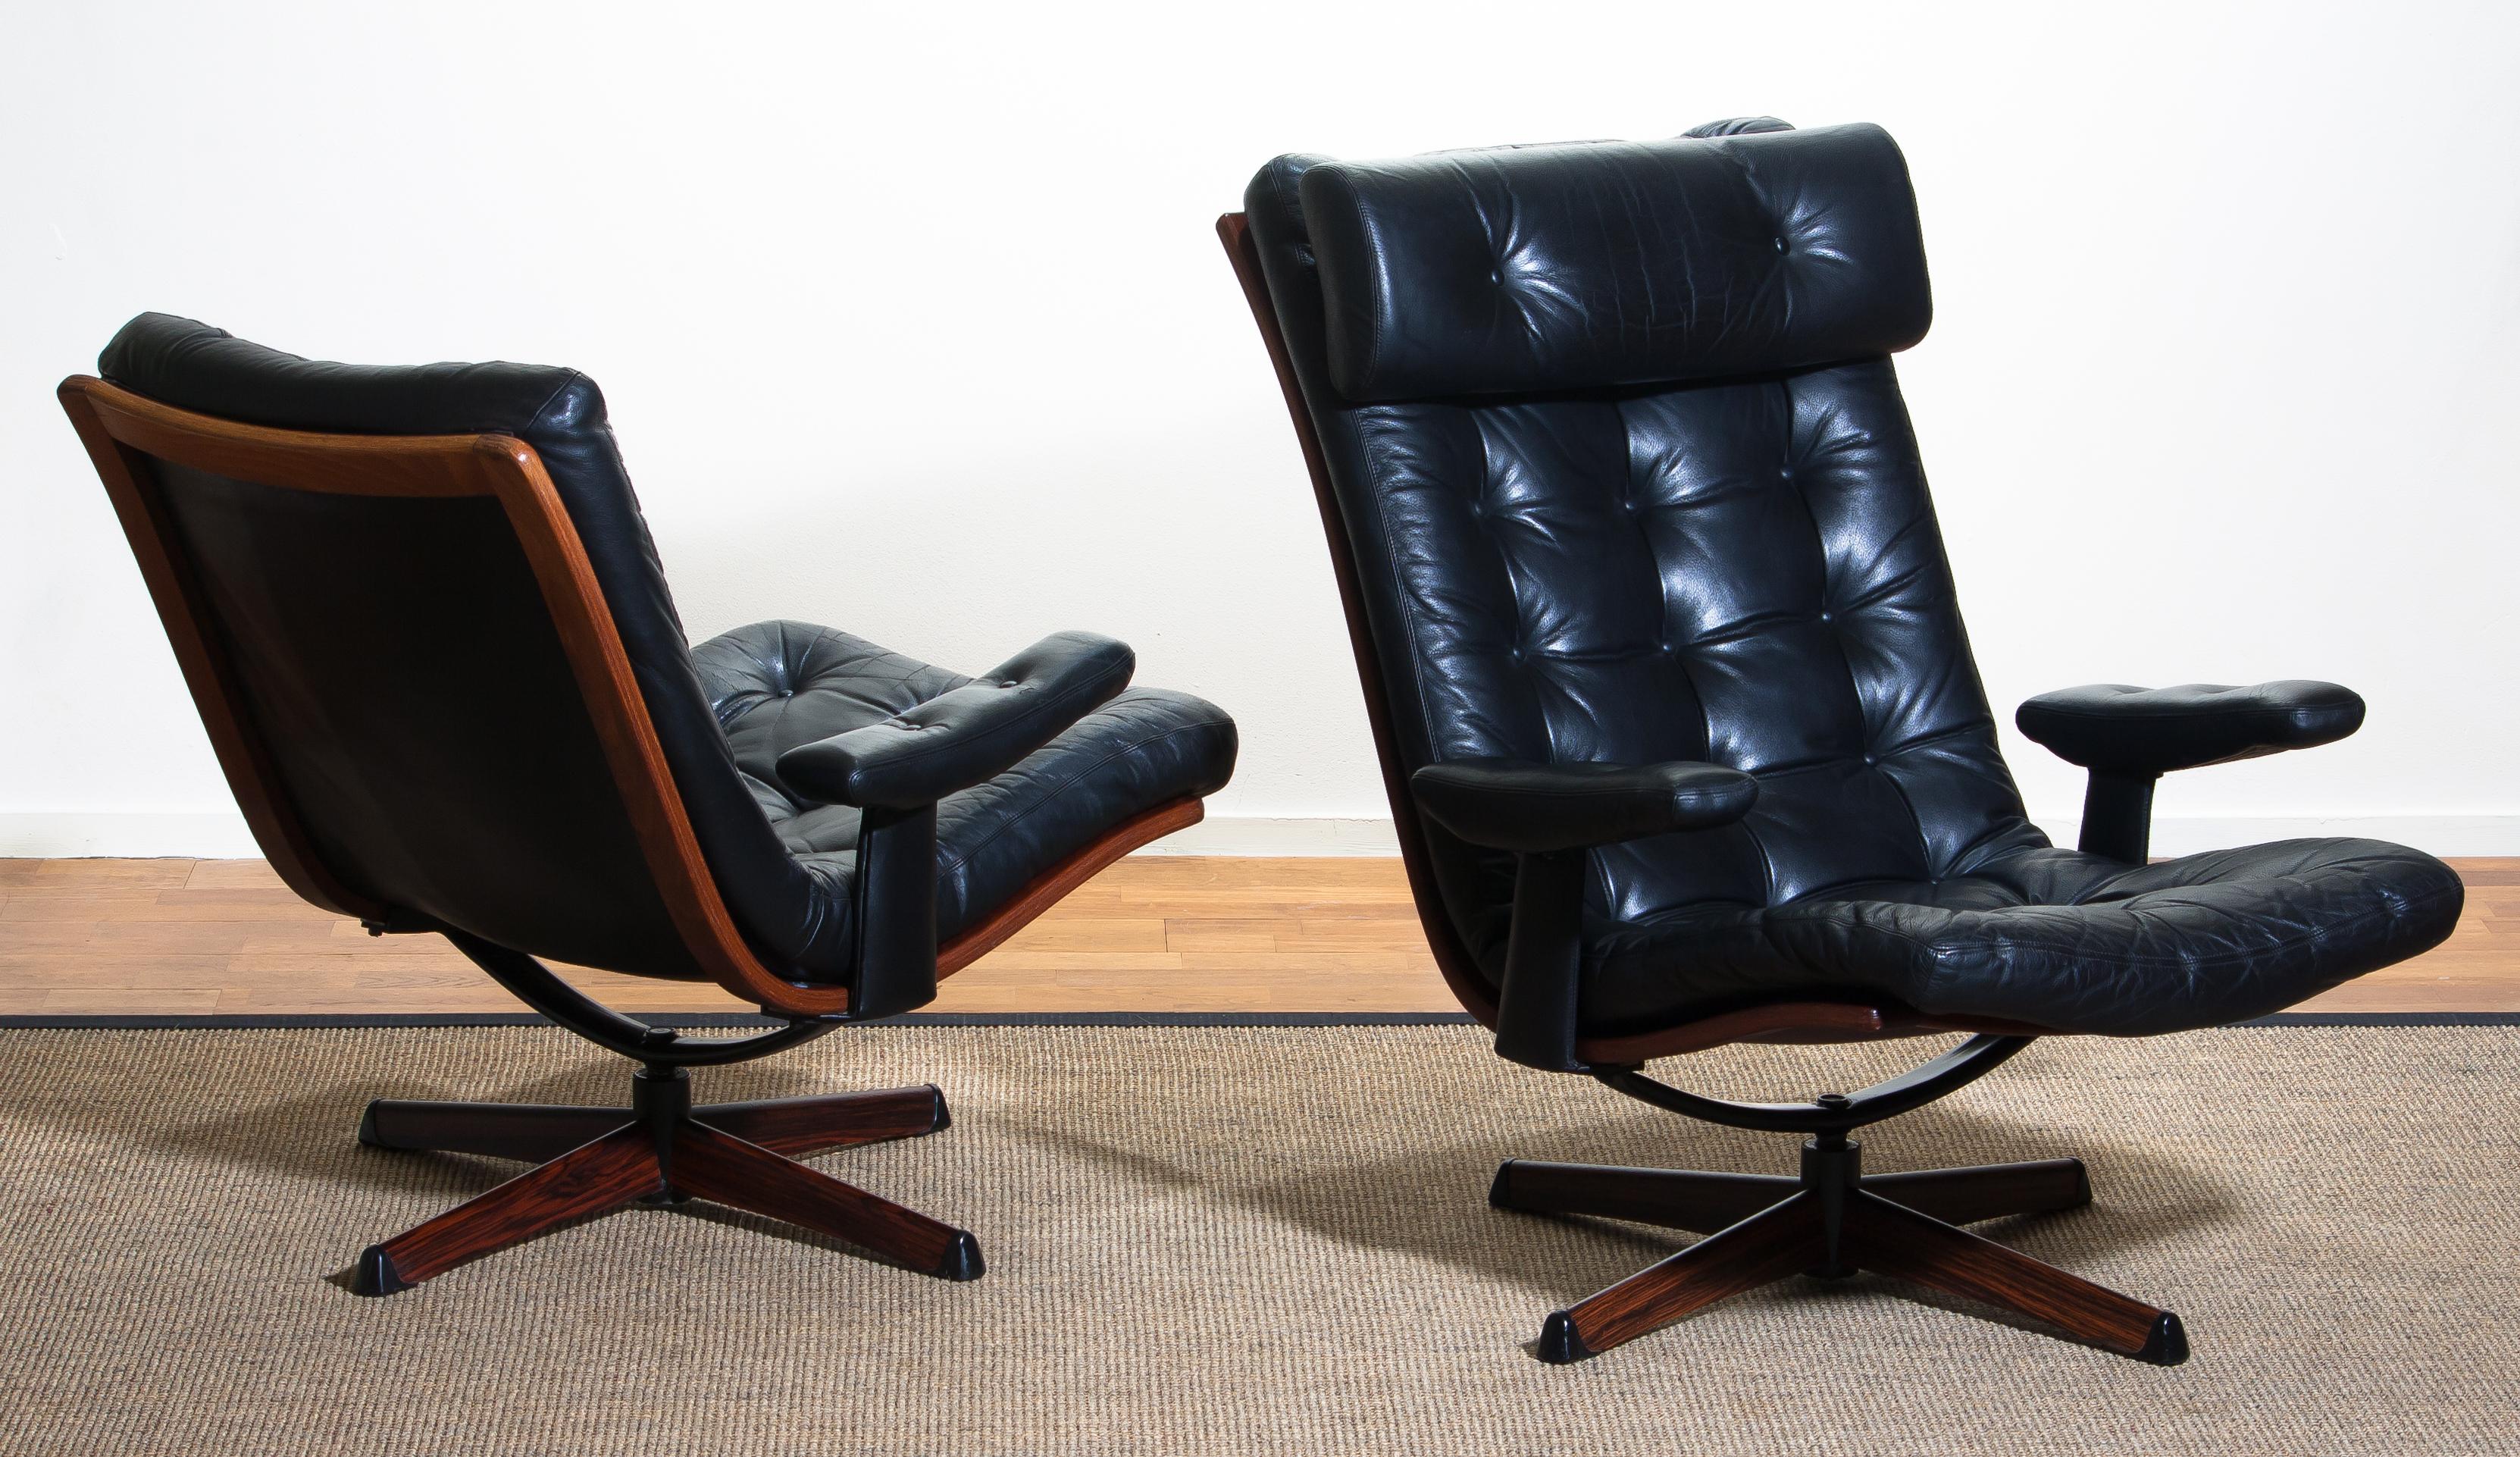 1960s Matching Pair of Black Leather Swivel Chairs by Gote Design Nassjo Sweden 4